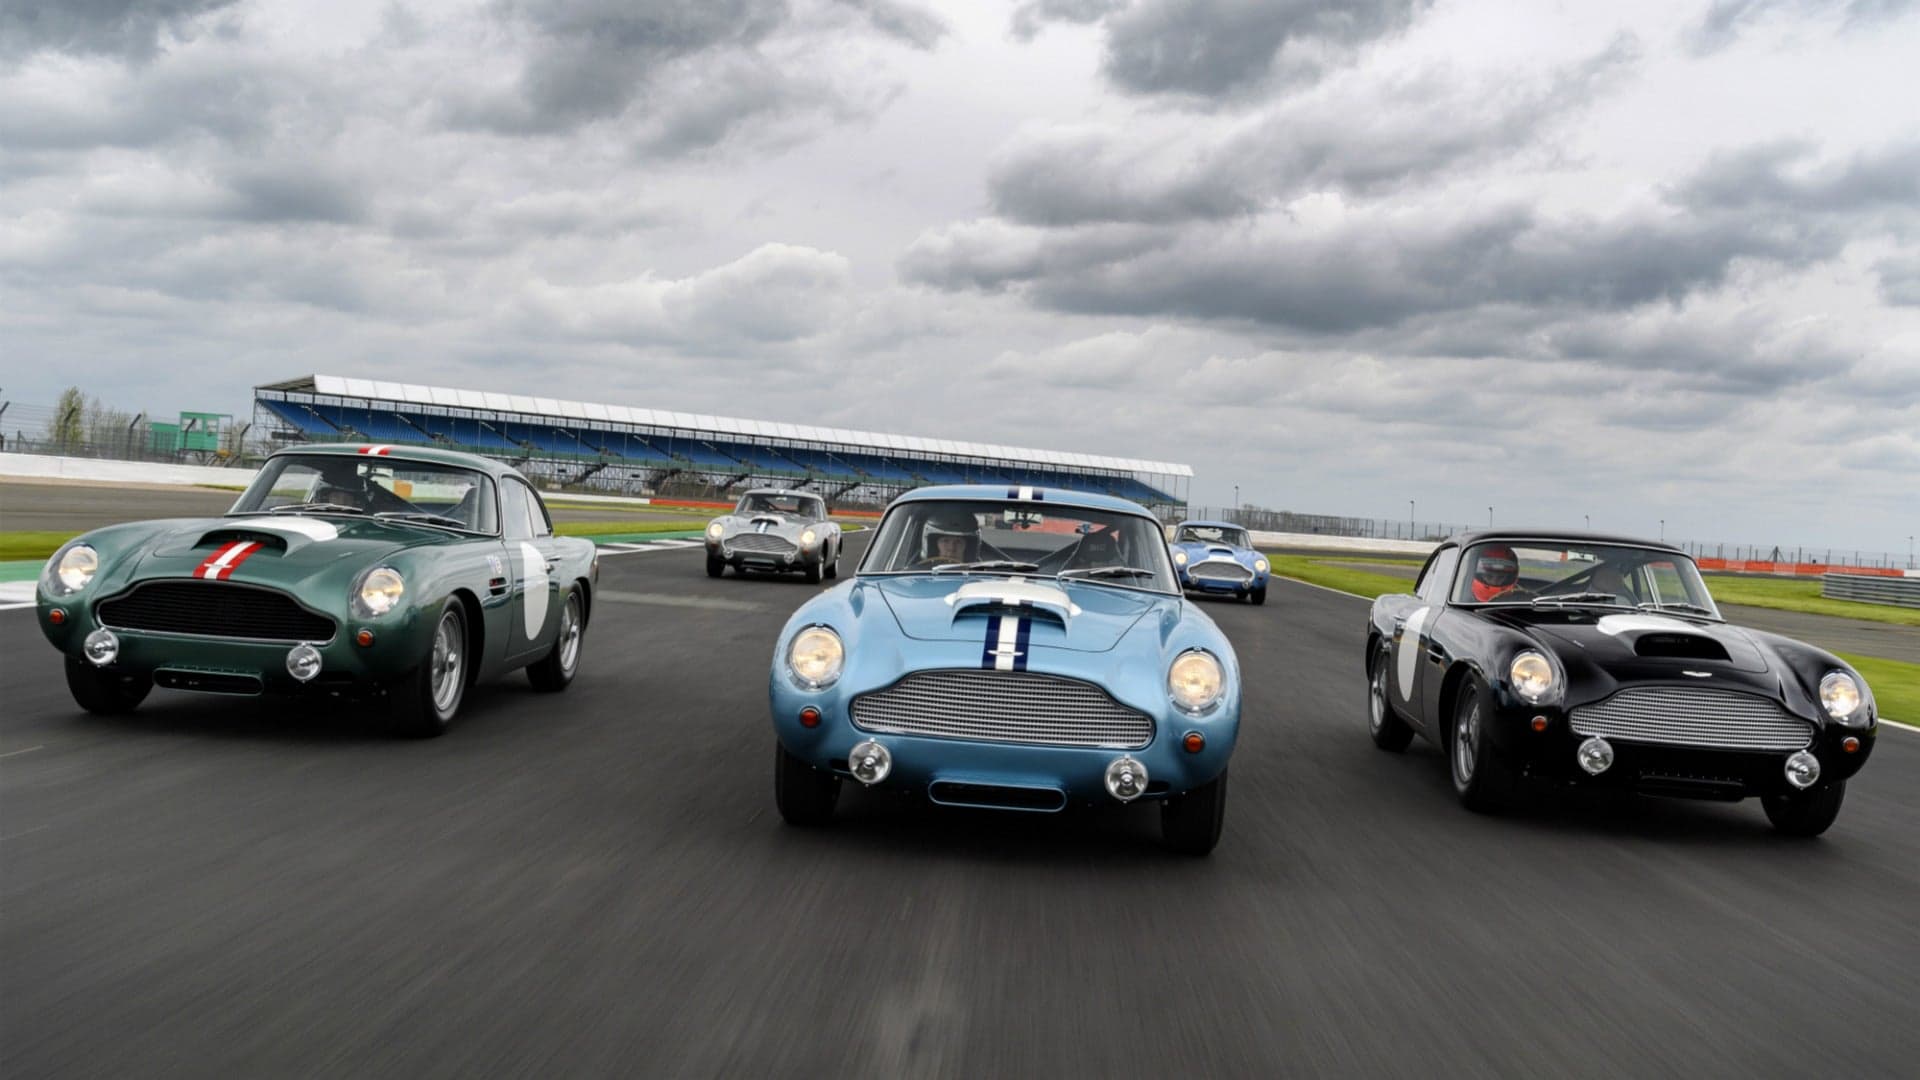 Aston Martin Hosts Inaugural Track Day for New DB4 GTs at Silverstone Circuit